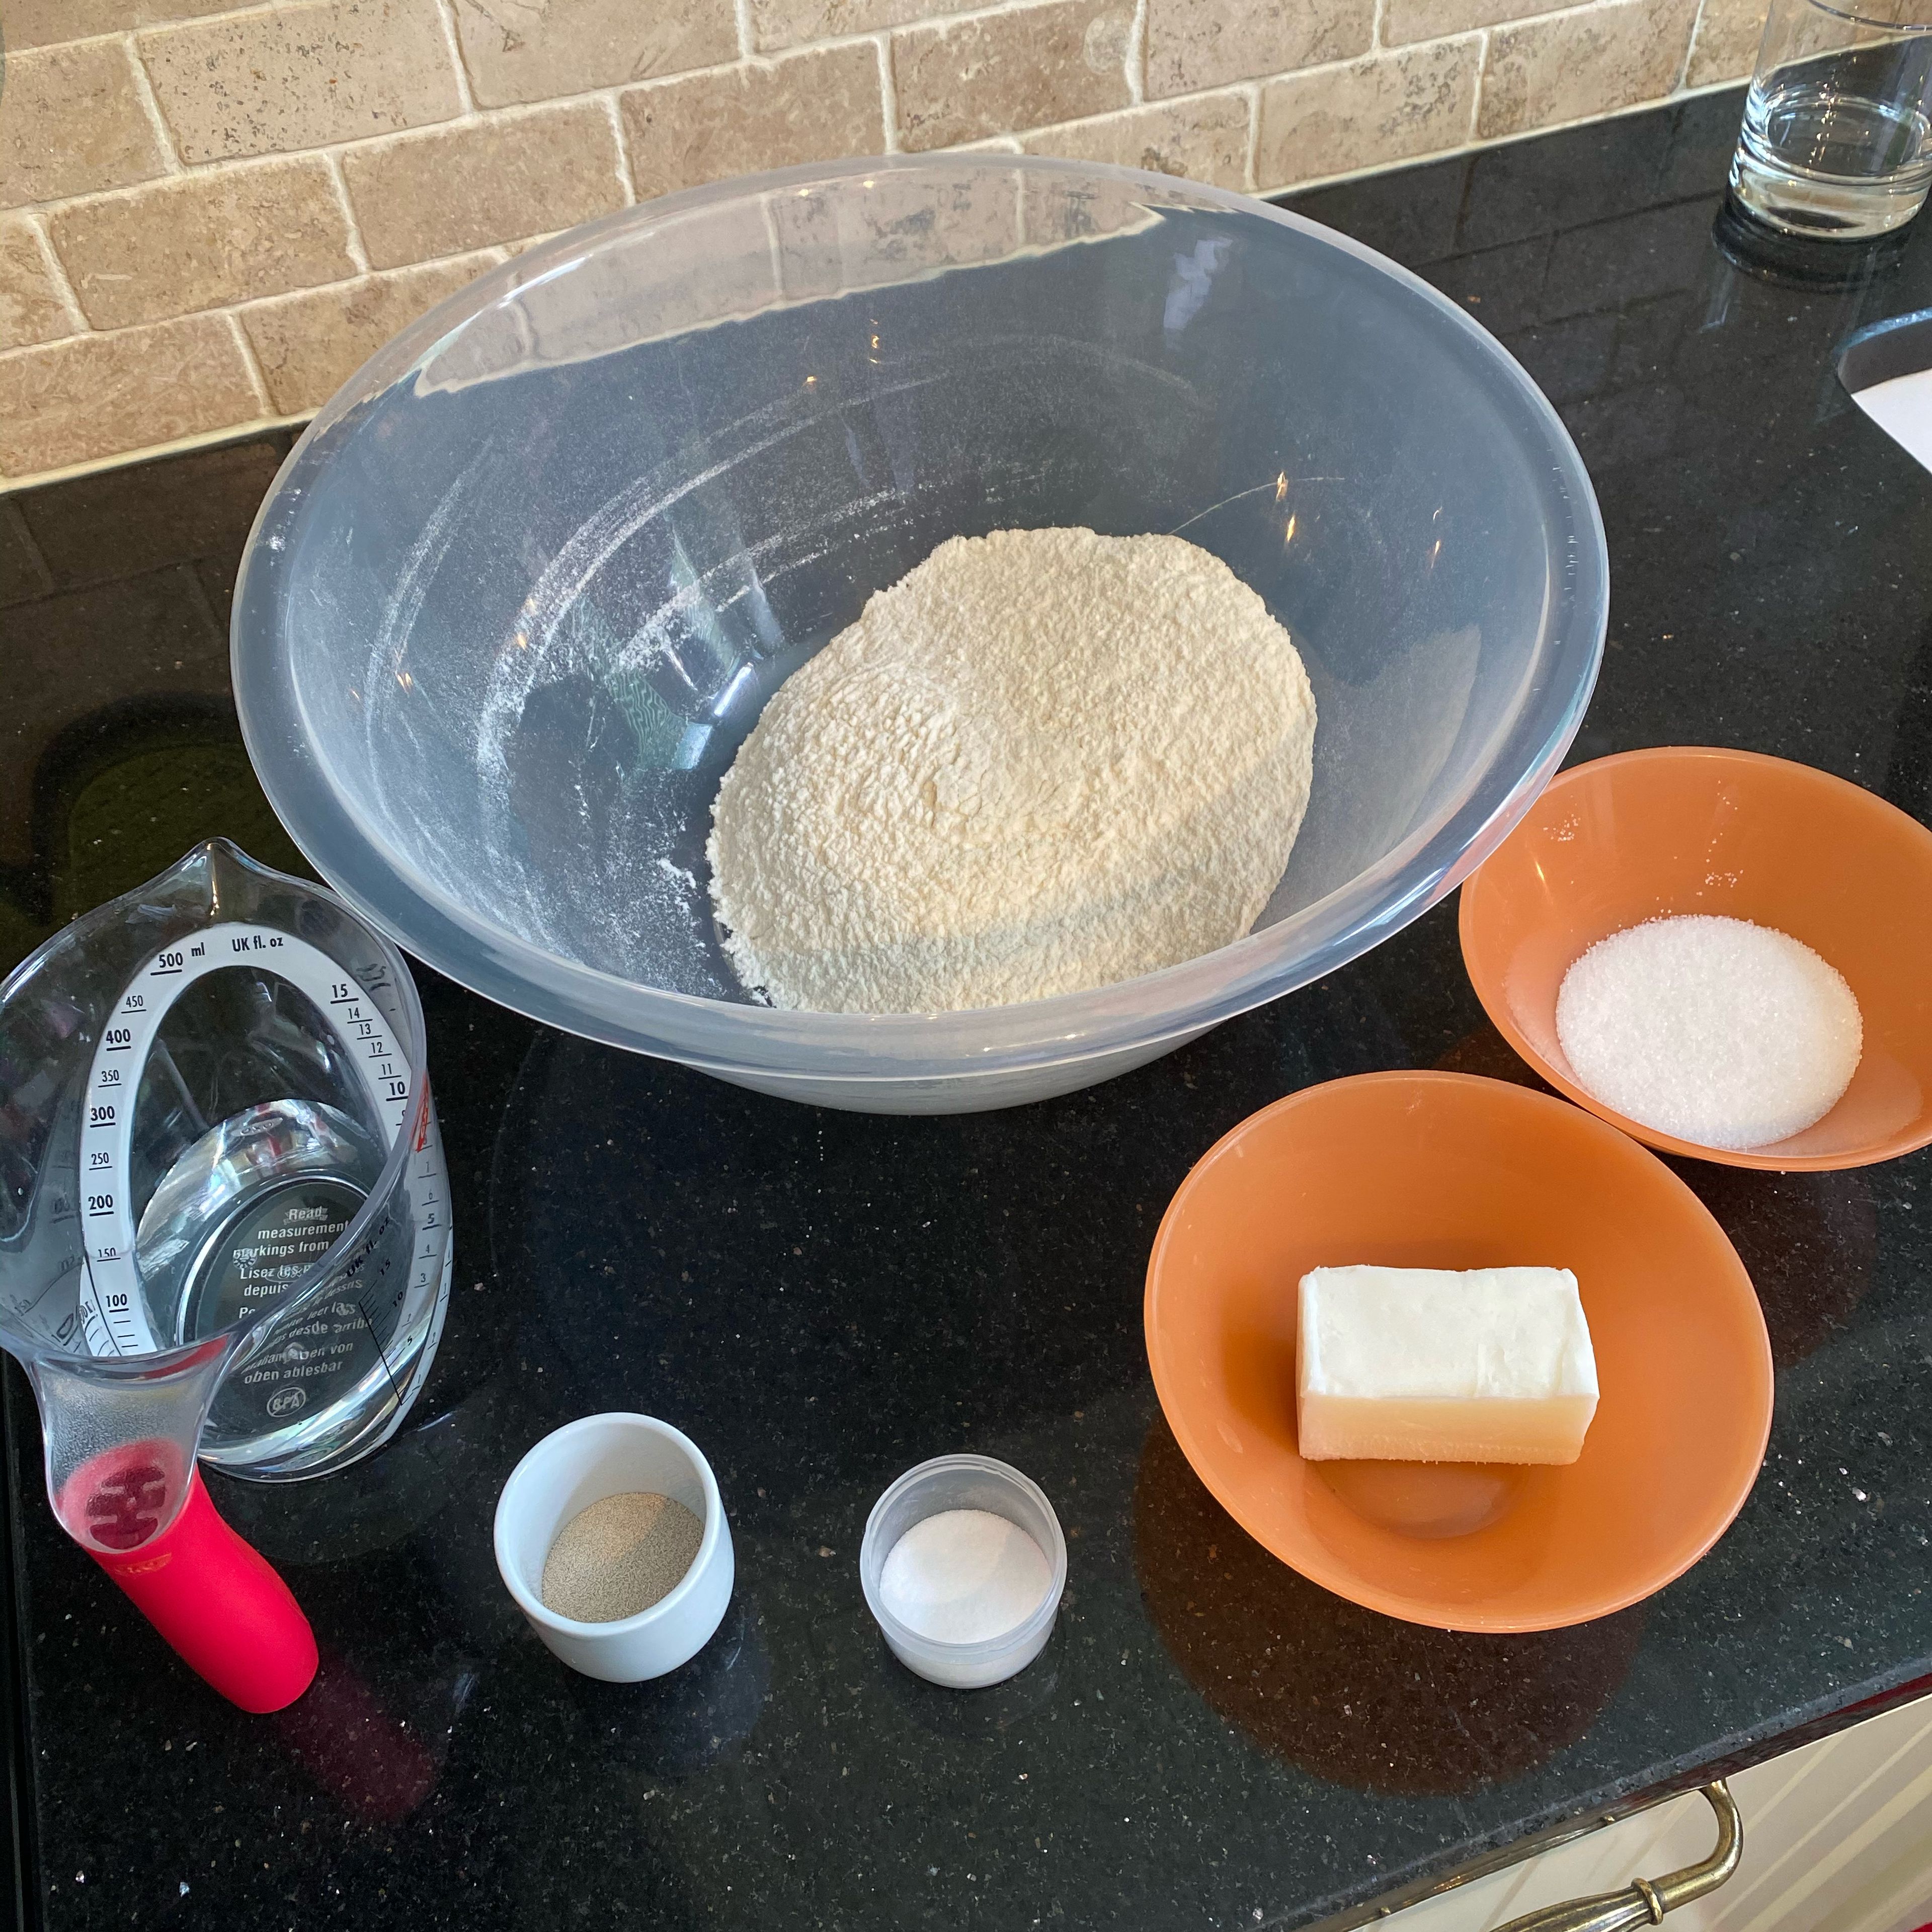 Measure out all the ingredients, first put the yeast and sugar in the flour and mix to activate the yeast